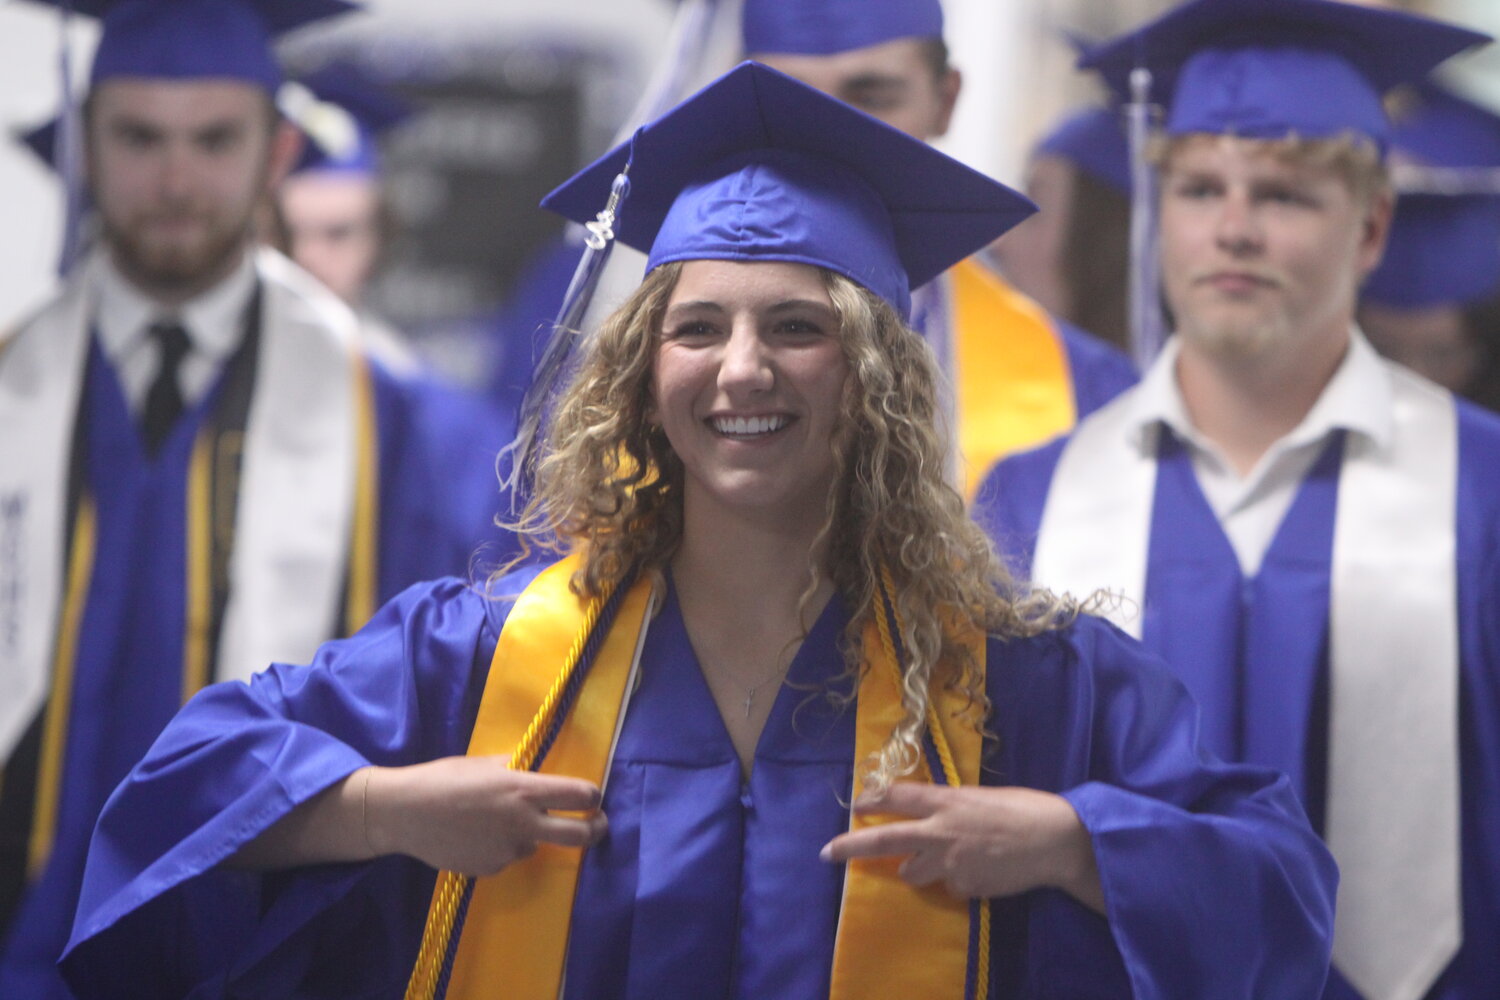 Marina Ridenhour walks down the school hallway to go to the graduation ceremony at Montgomery County High School on May 19, which was also her 18th birthday.